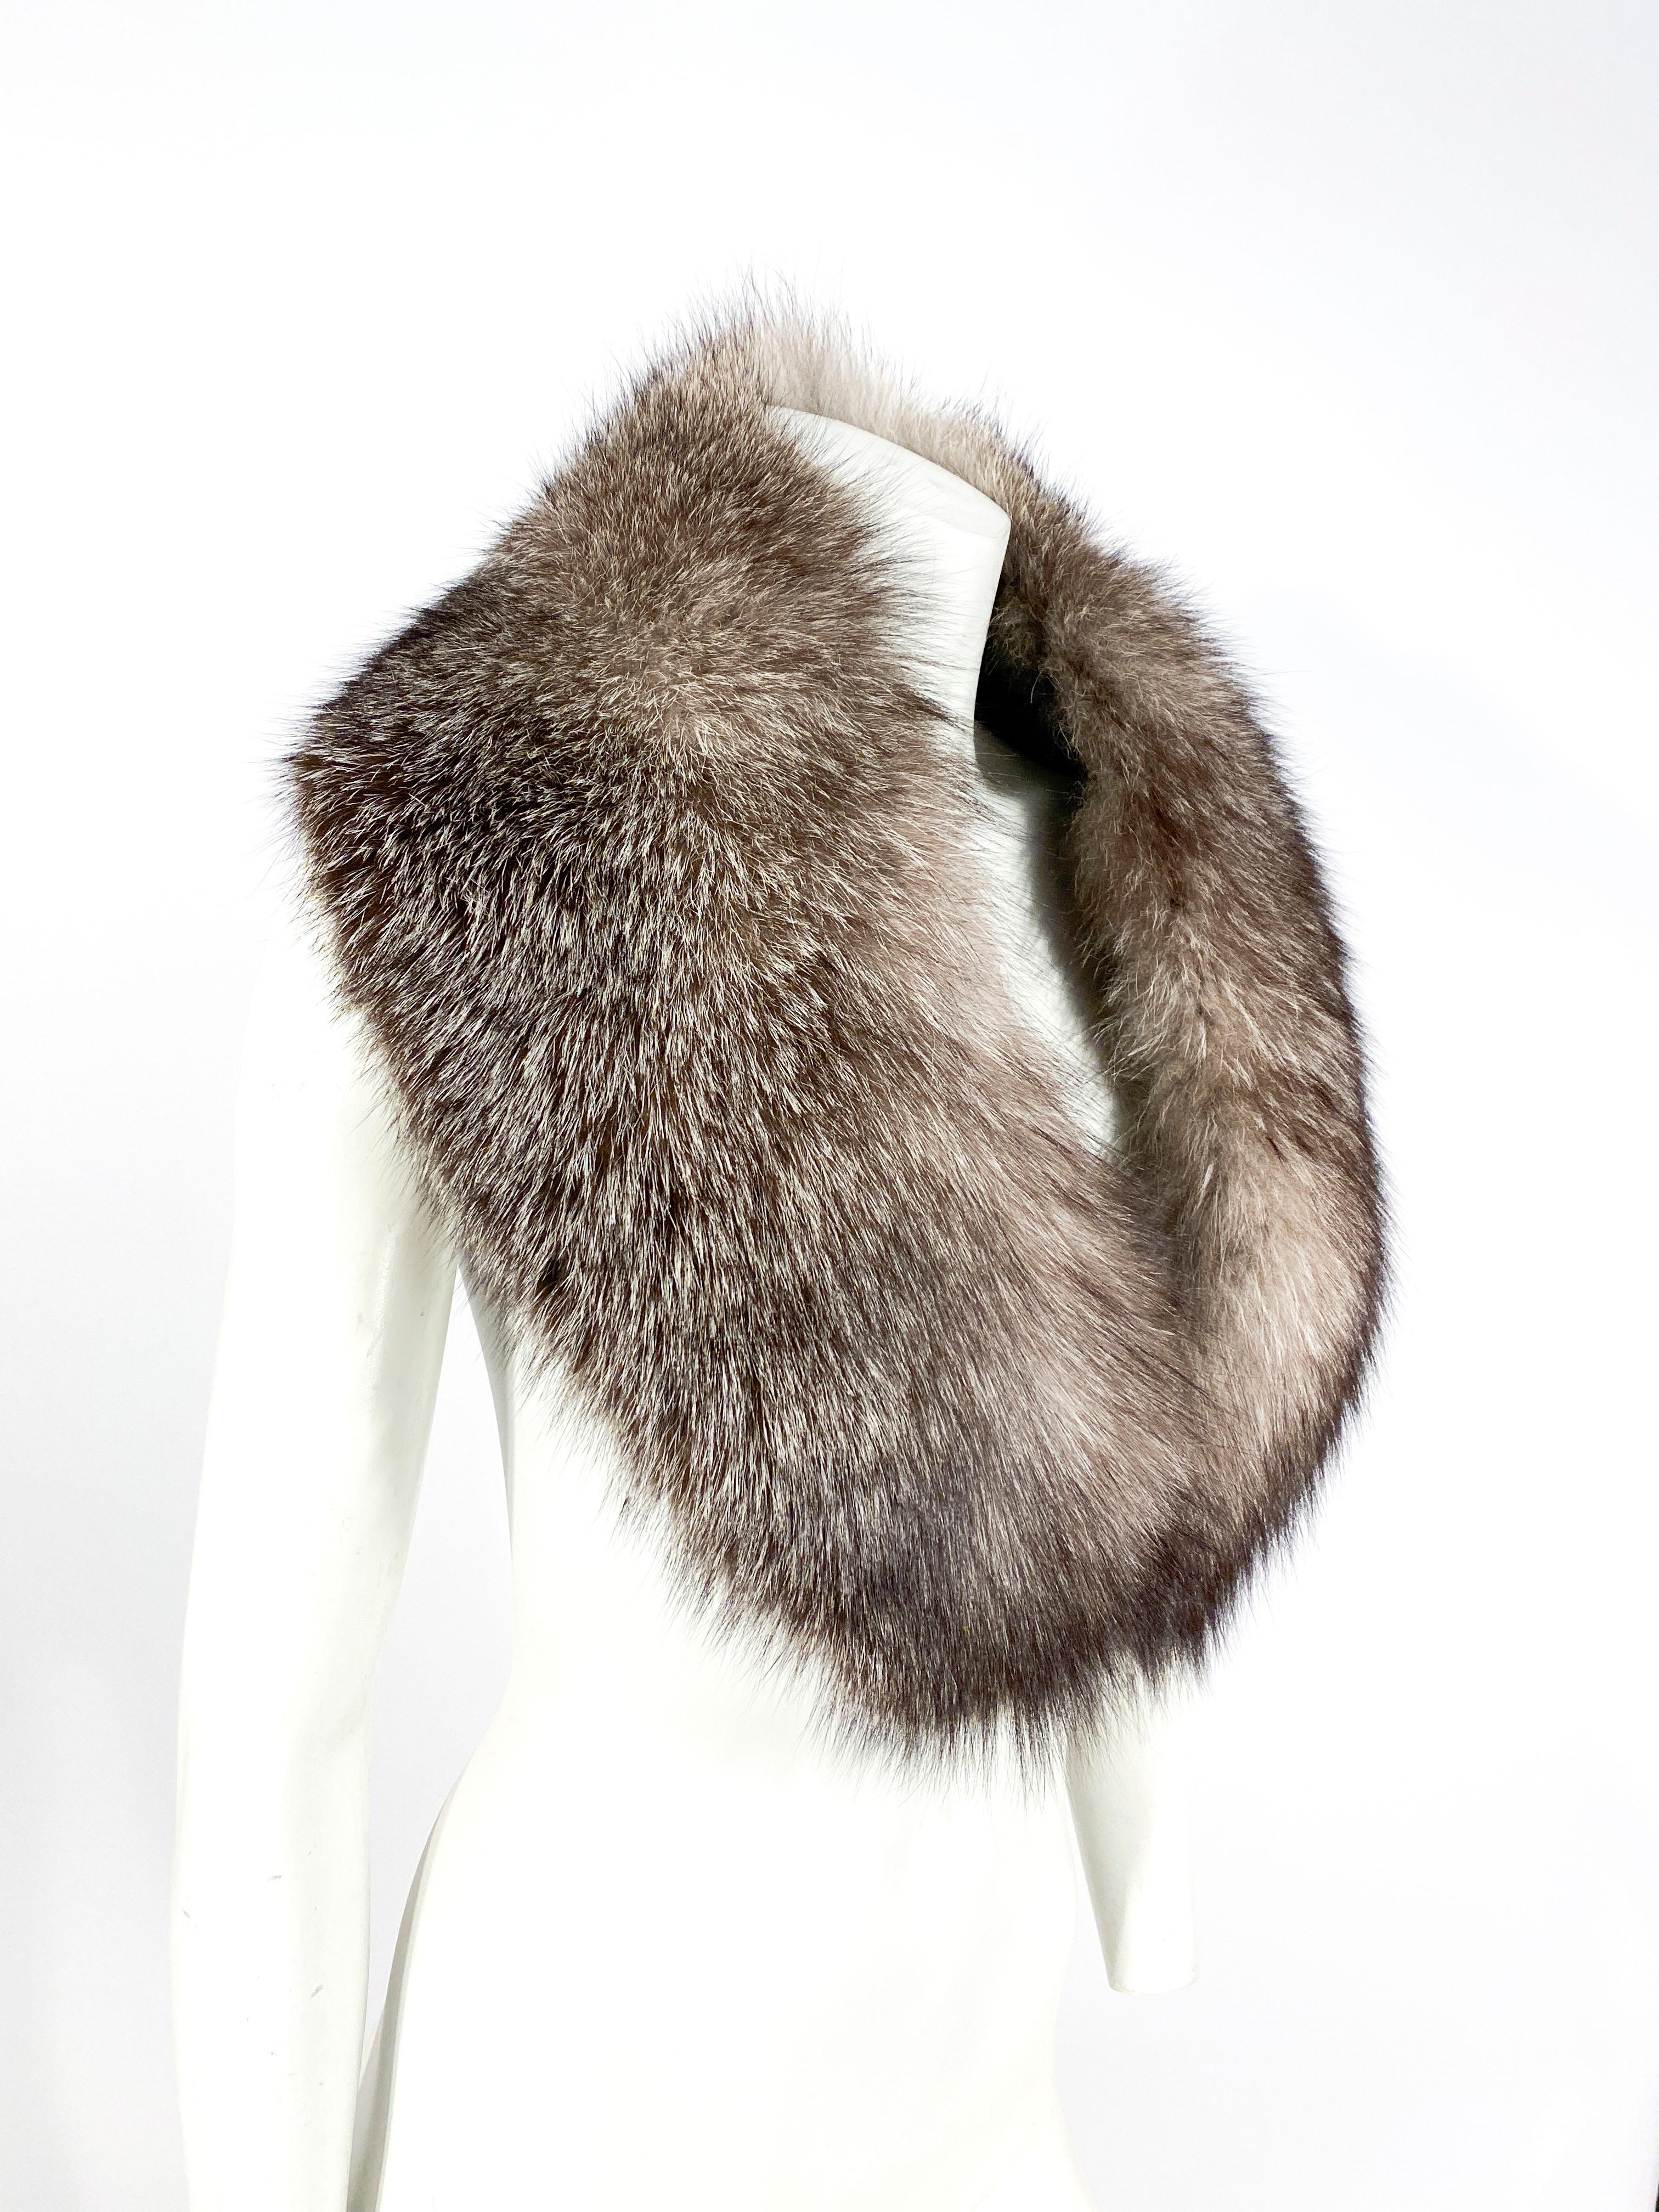 Silver tipped full fox that can be worn as a stole or an enlarged collar. The fur is very dense and very soft with a traditional fur hook closure. The fur is entirely lined with a silver floral pattern textile. 